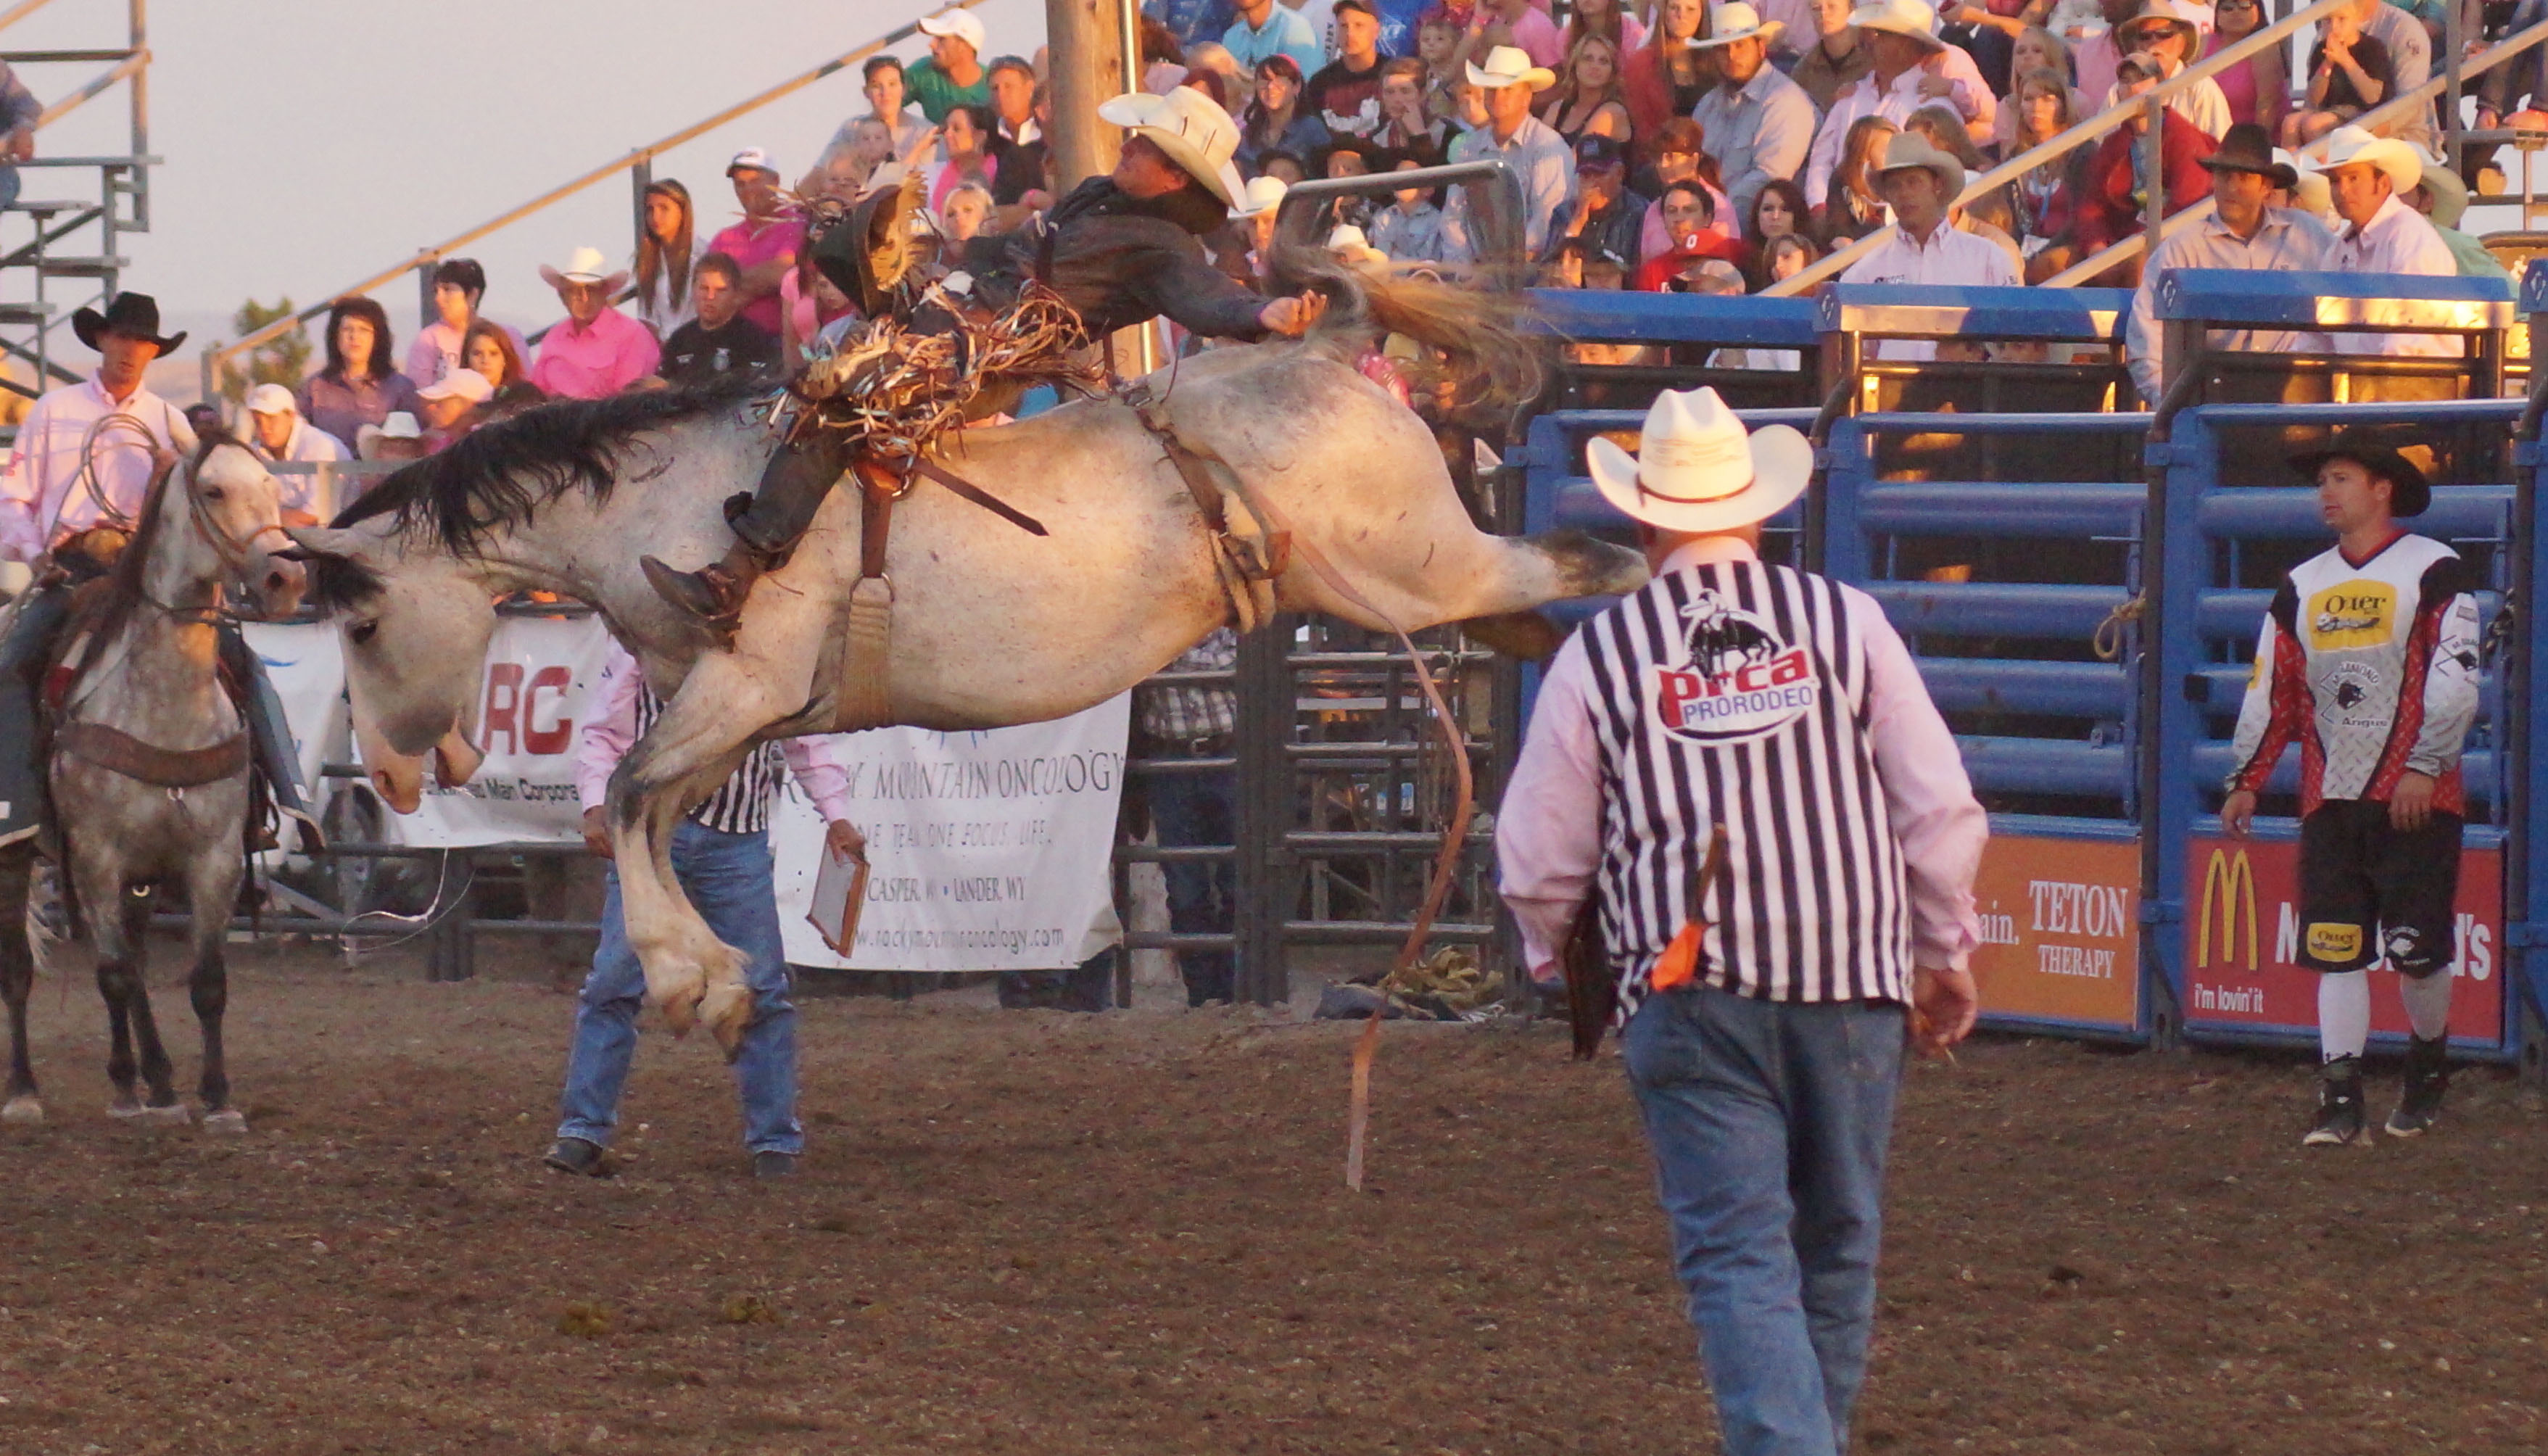 Real Rodeo In Action At The Prca Rodeo Photo By Jennie Hutchinson